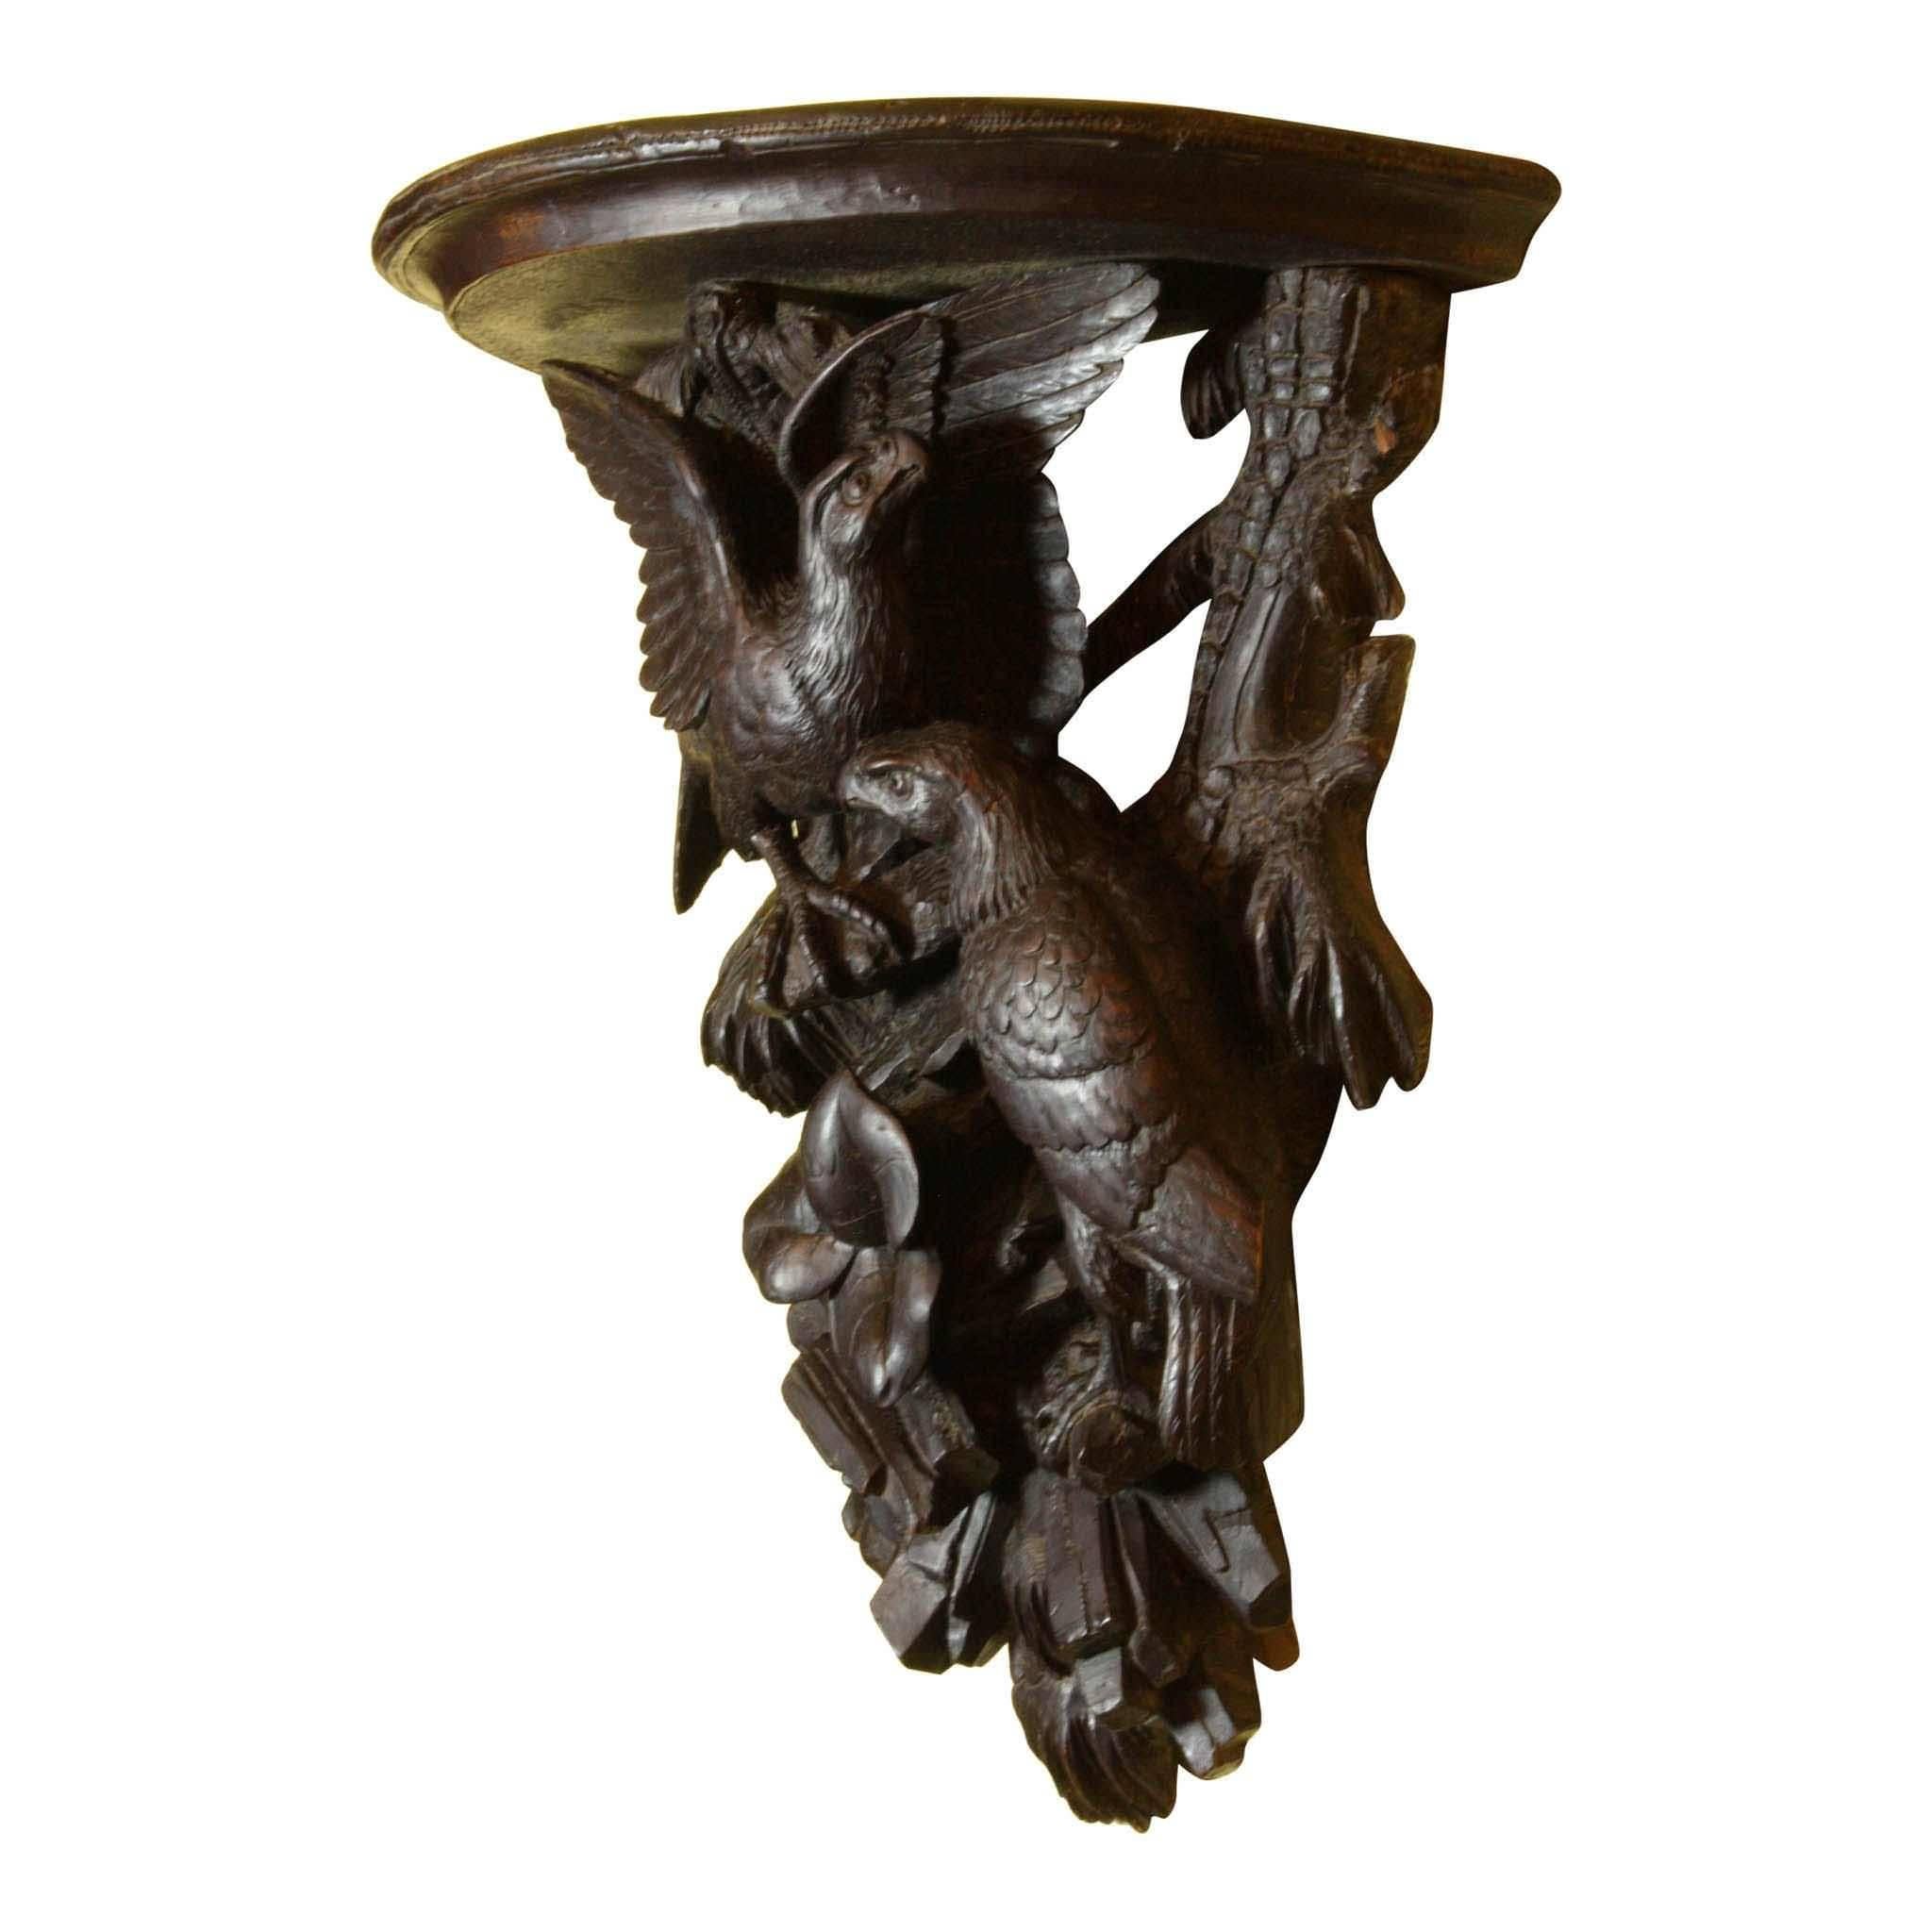 A nesting pair of Kestrels is perched on this carved Black Forest shelf. The quality of the piece is reflected in the detail. Notice the plumage and talons, the grooving on the branches, and the detail of the foliage. A lovely shelf.